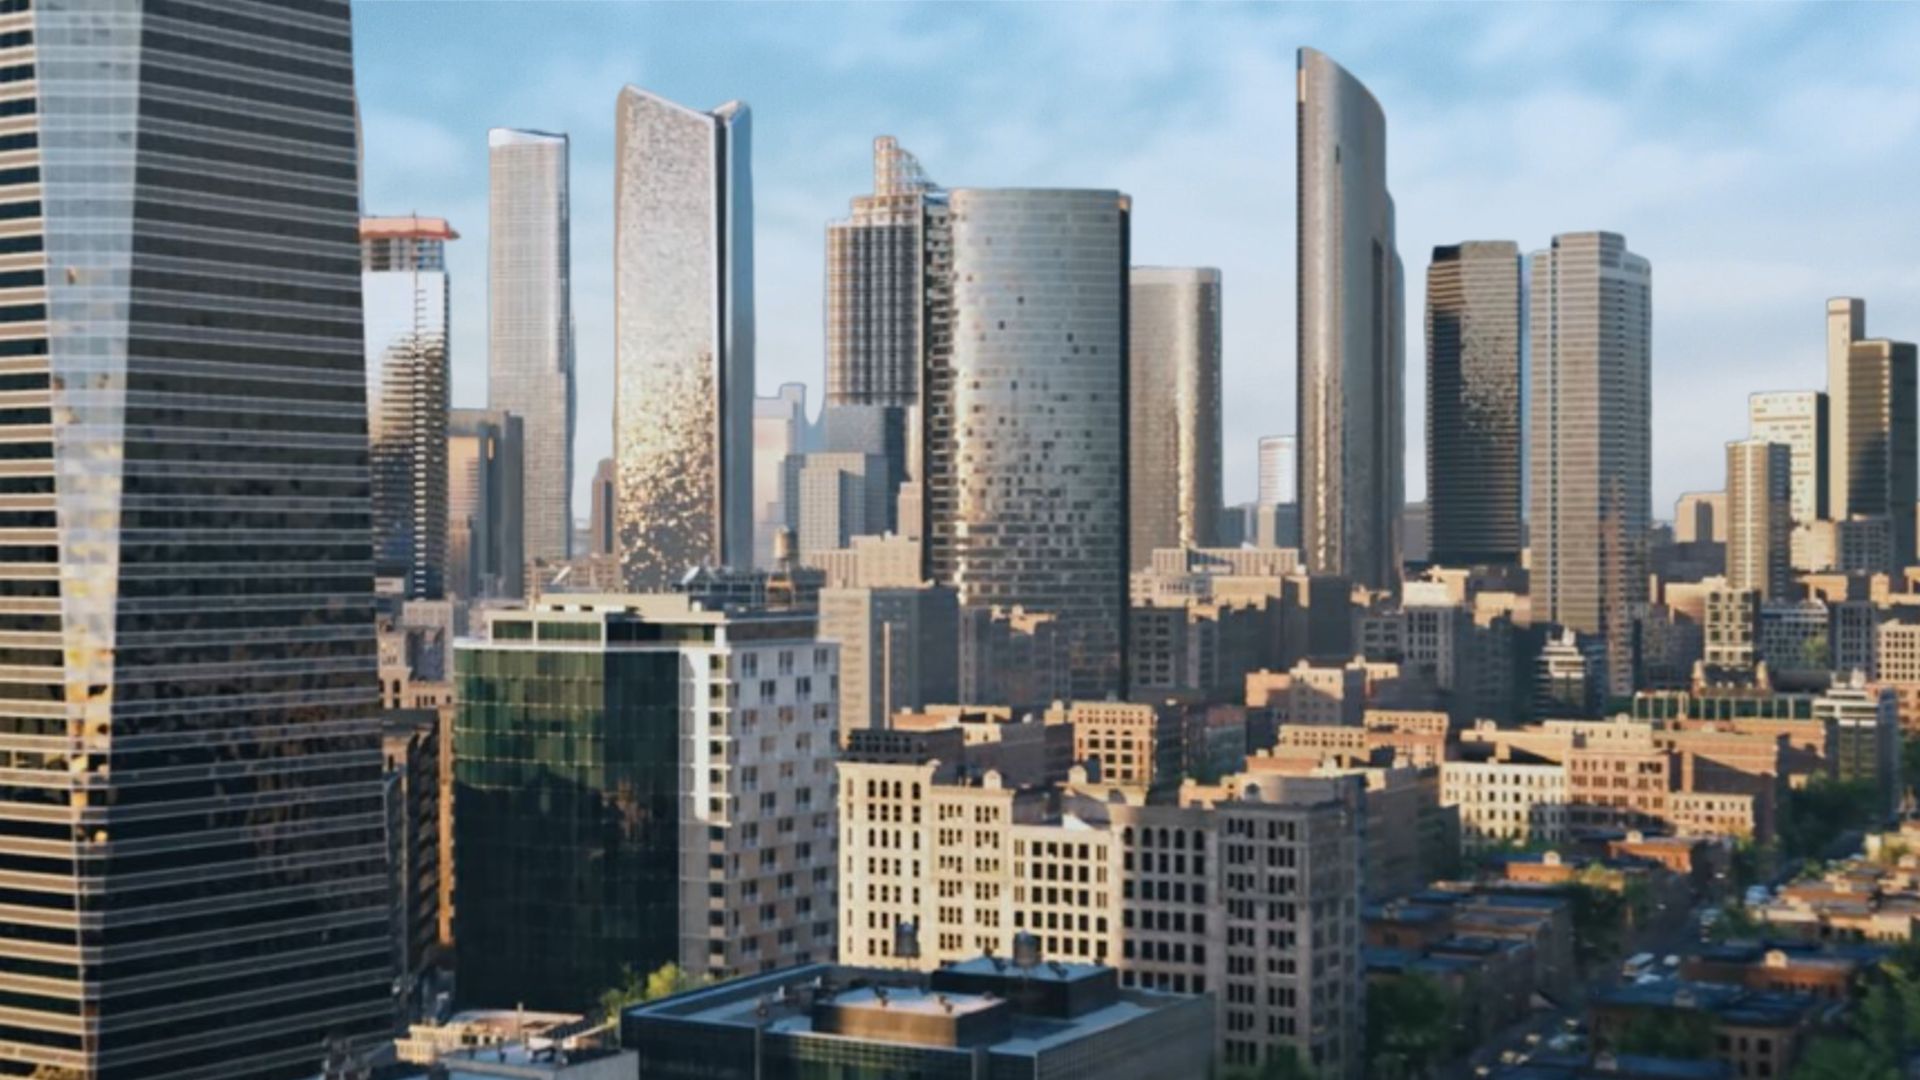 Paradox announce Cities: Skylines 2 and more are launching on Xbox